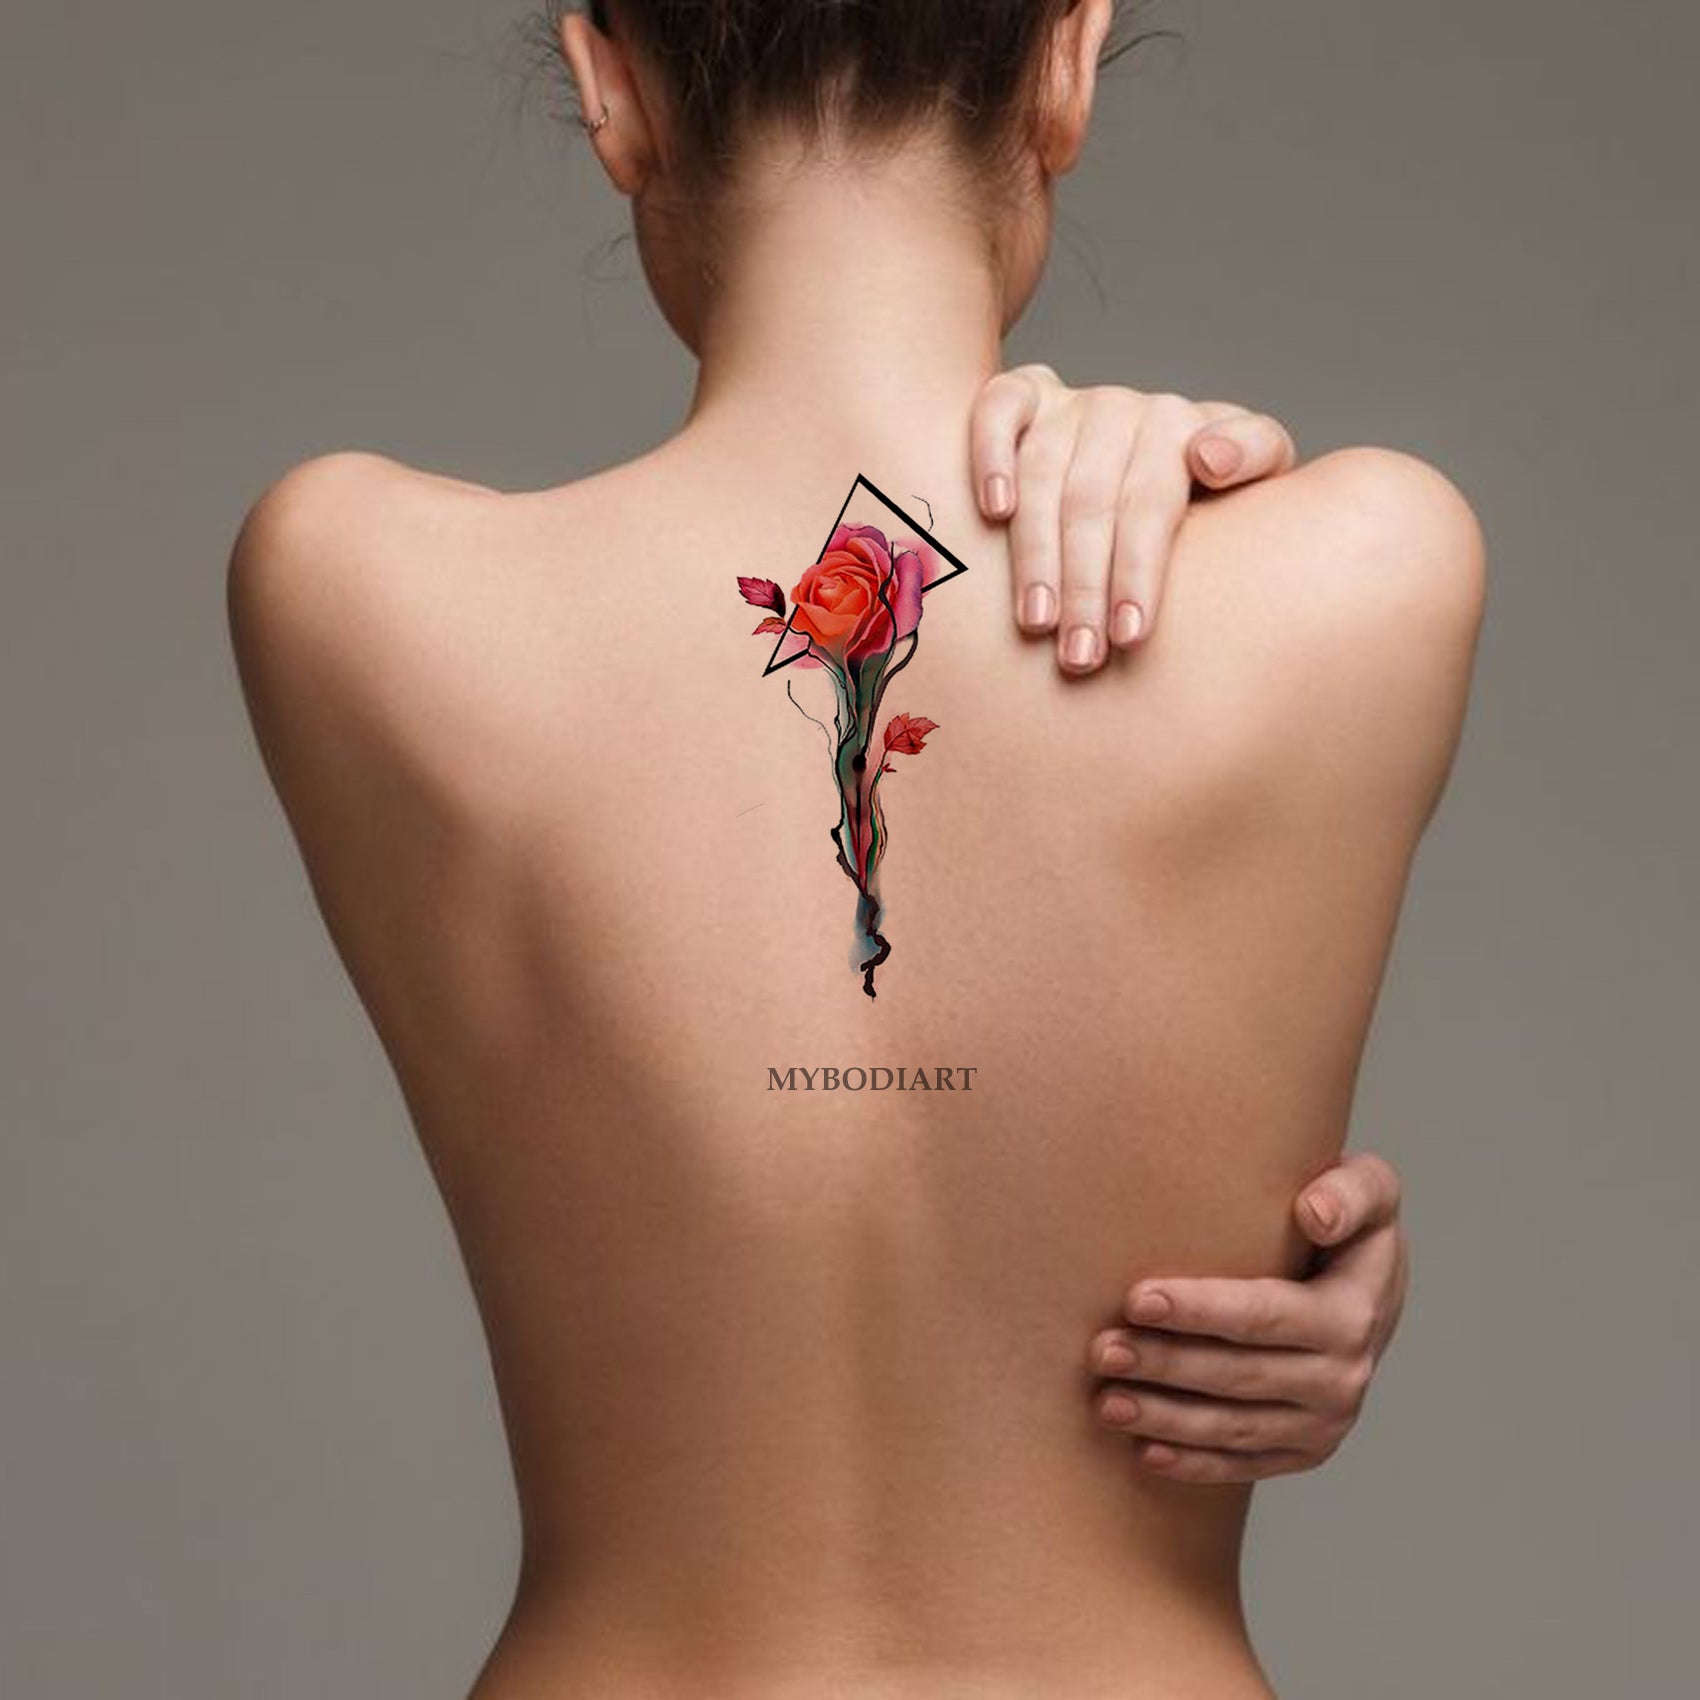 Minimalistic ornament tattooed on the back done in red